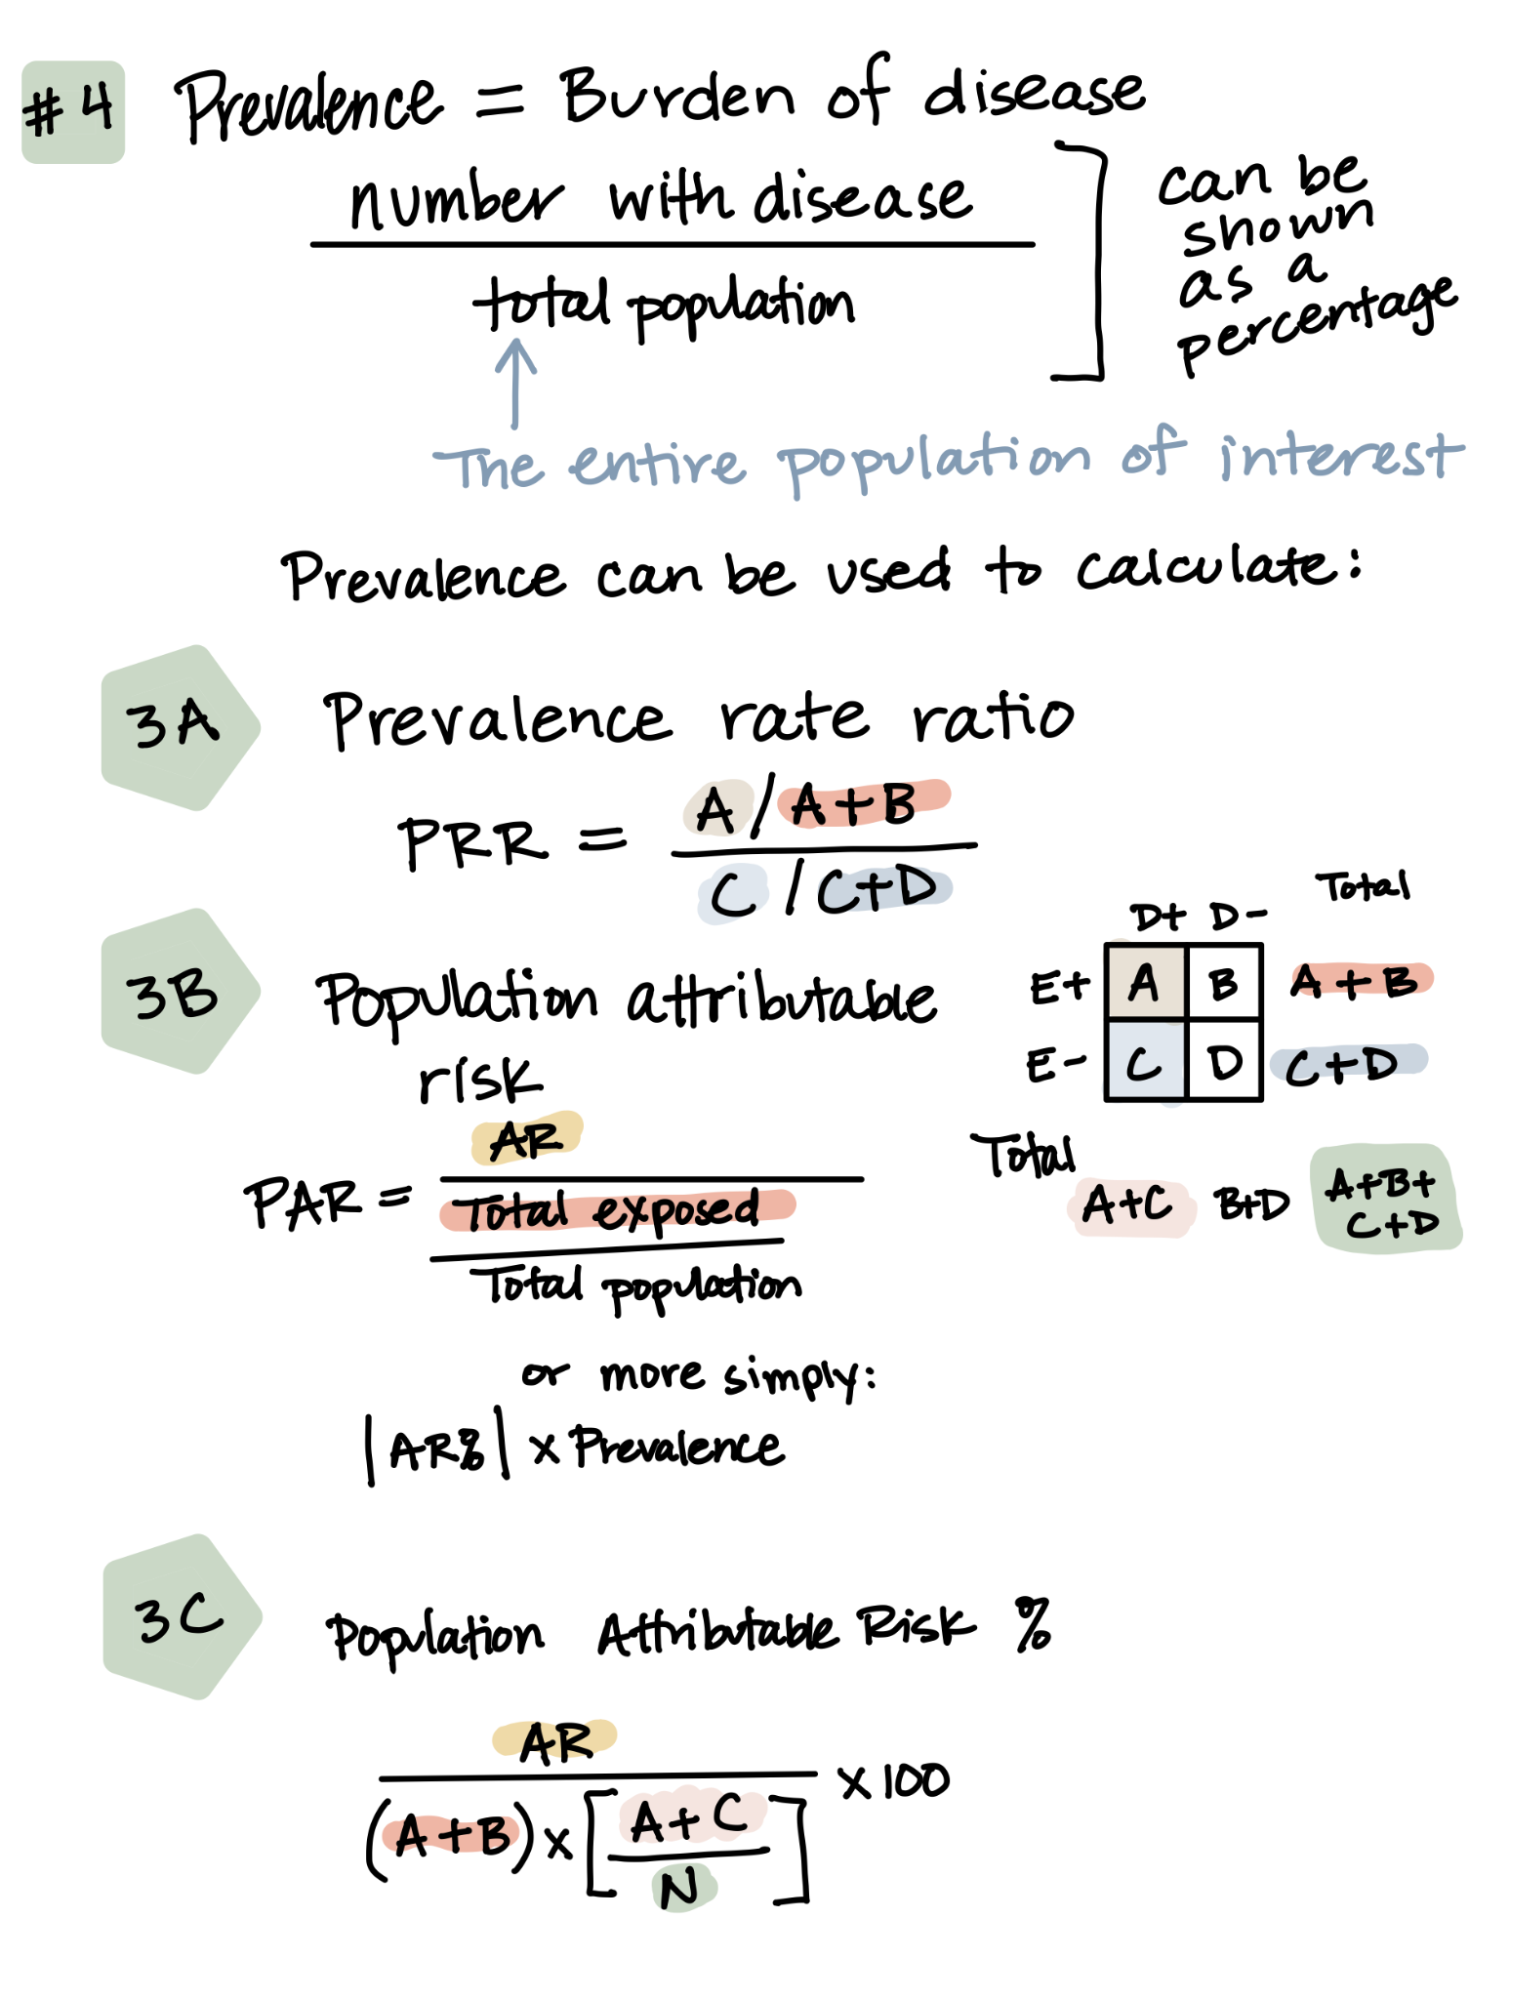 Prevalence is the burden of disease. Prevalence is the number with disease divided by the total population (the entire population of interest). Can be shown as a percentage. Prevalence can be used to calculate: 3a. Prevalence Rate Ratio (PRR), which is equal to [A/(A+B)]/[C/(C+D)]. 3b. Population Attributable Risk (PAR, which is equal to AR/[Total exposed/Total population] or more simply, the absolute value of AR% multiplied by prevalence. 3c. Population Attributable Risk %, which is equal to AR/[(A+B)*((A+C)/N)] multiplied by 100.